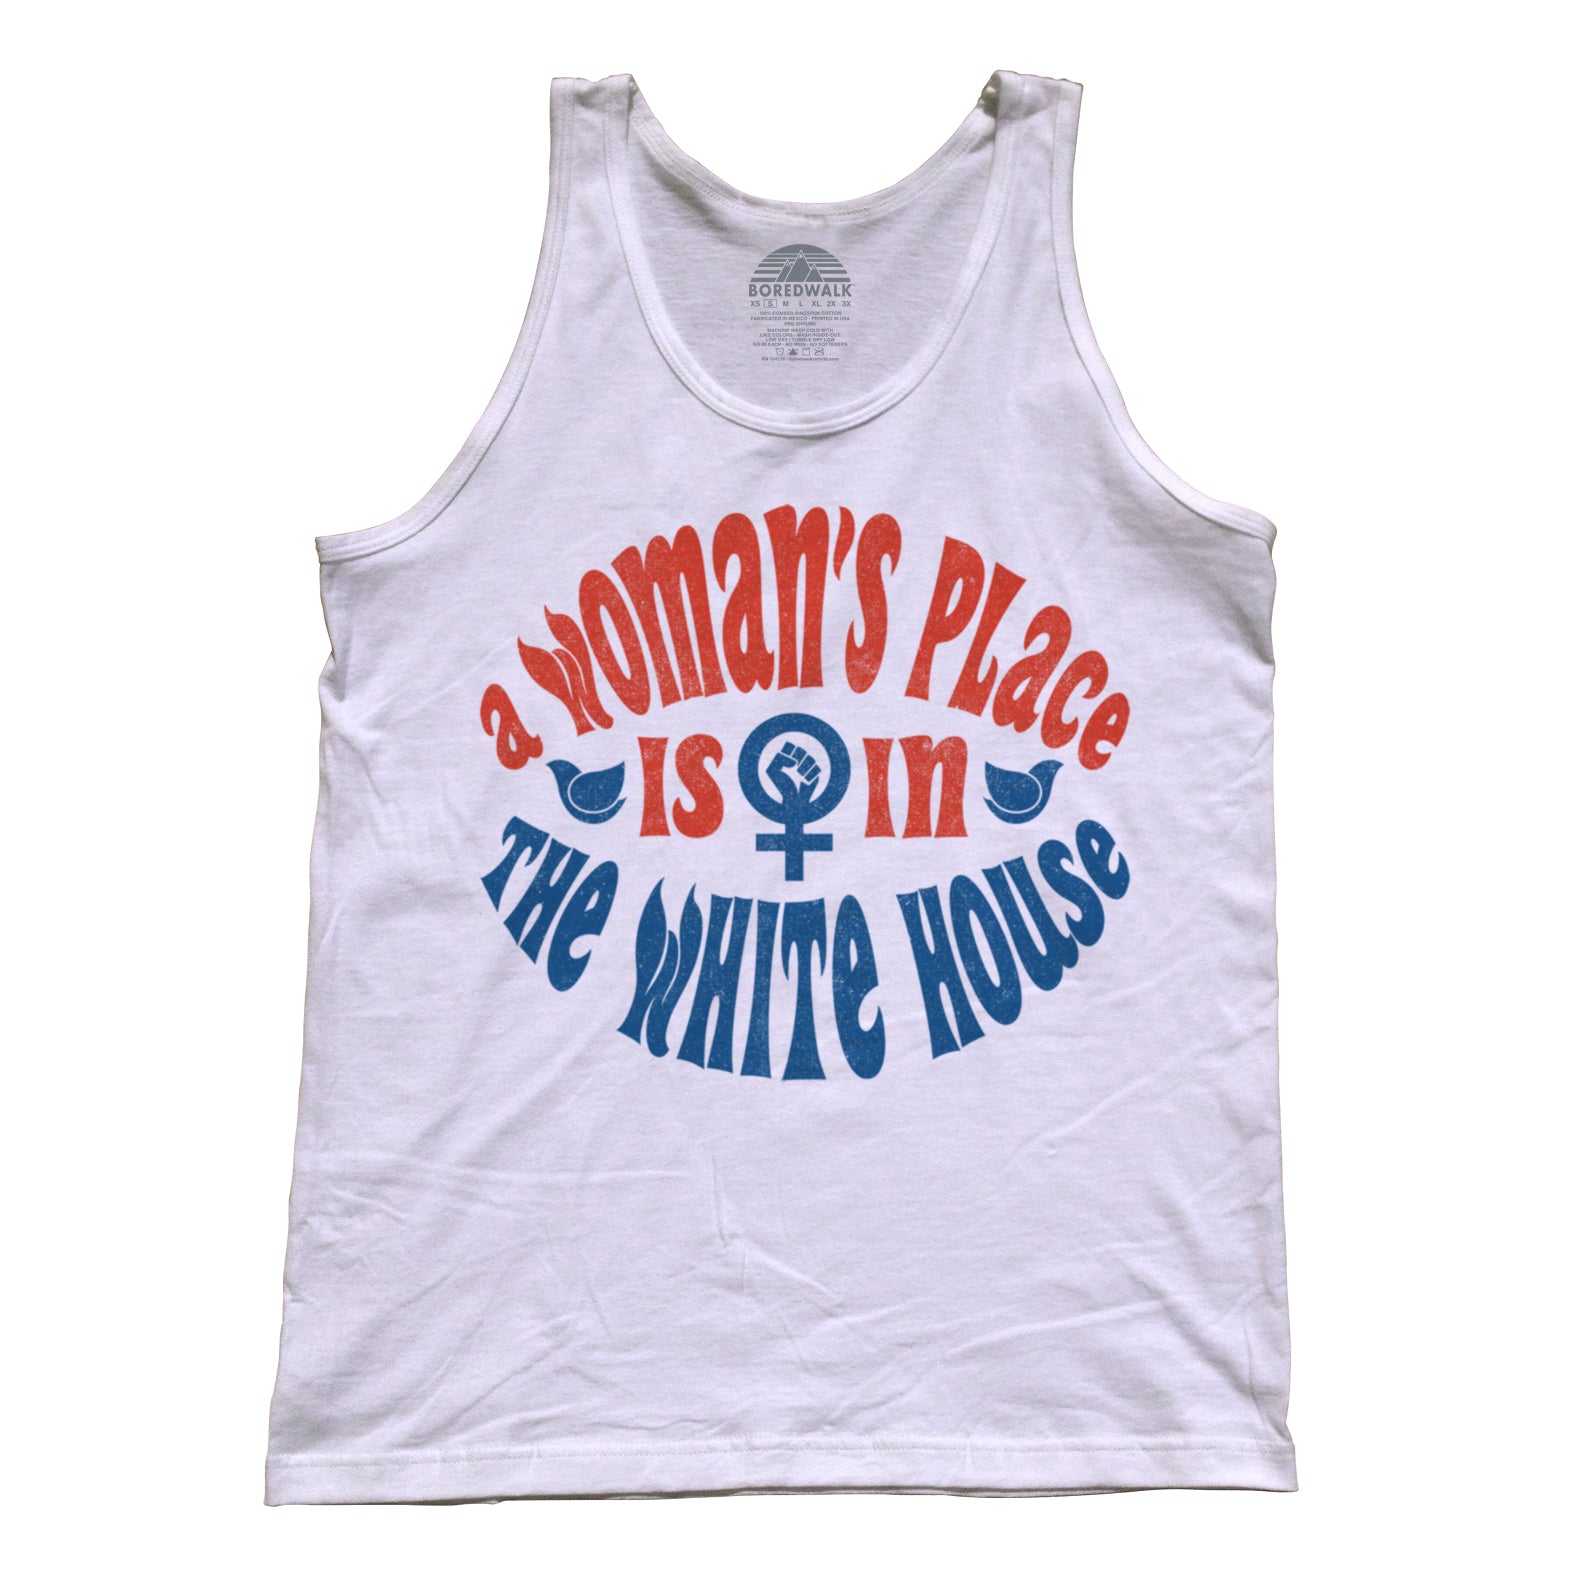 Unisex A Woman's Place is in The White House Tank Top